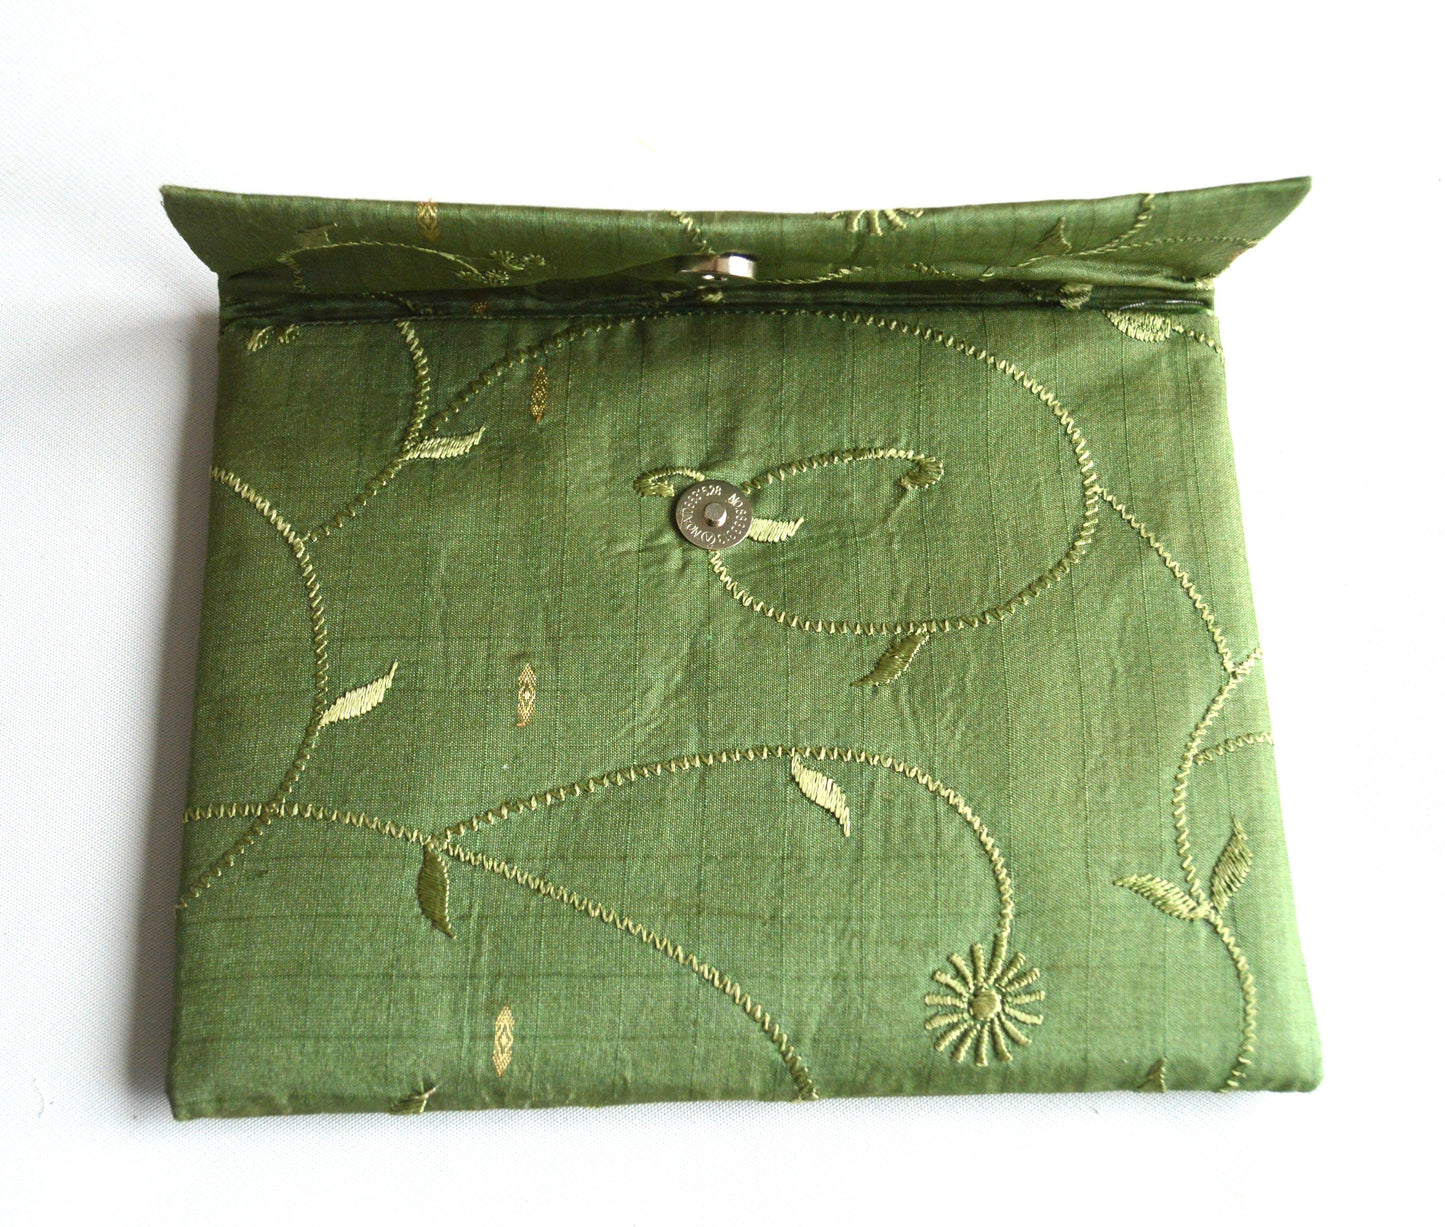 Sage Green Embroidered Floral Sari Silk Envelope Clutch Purse - Handmade Sophisticated Recycled Evening Wedding Bridesmaids Purse